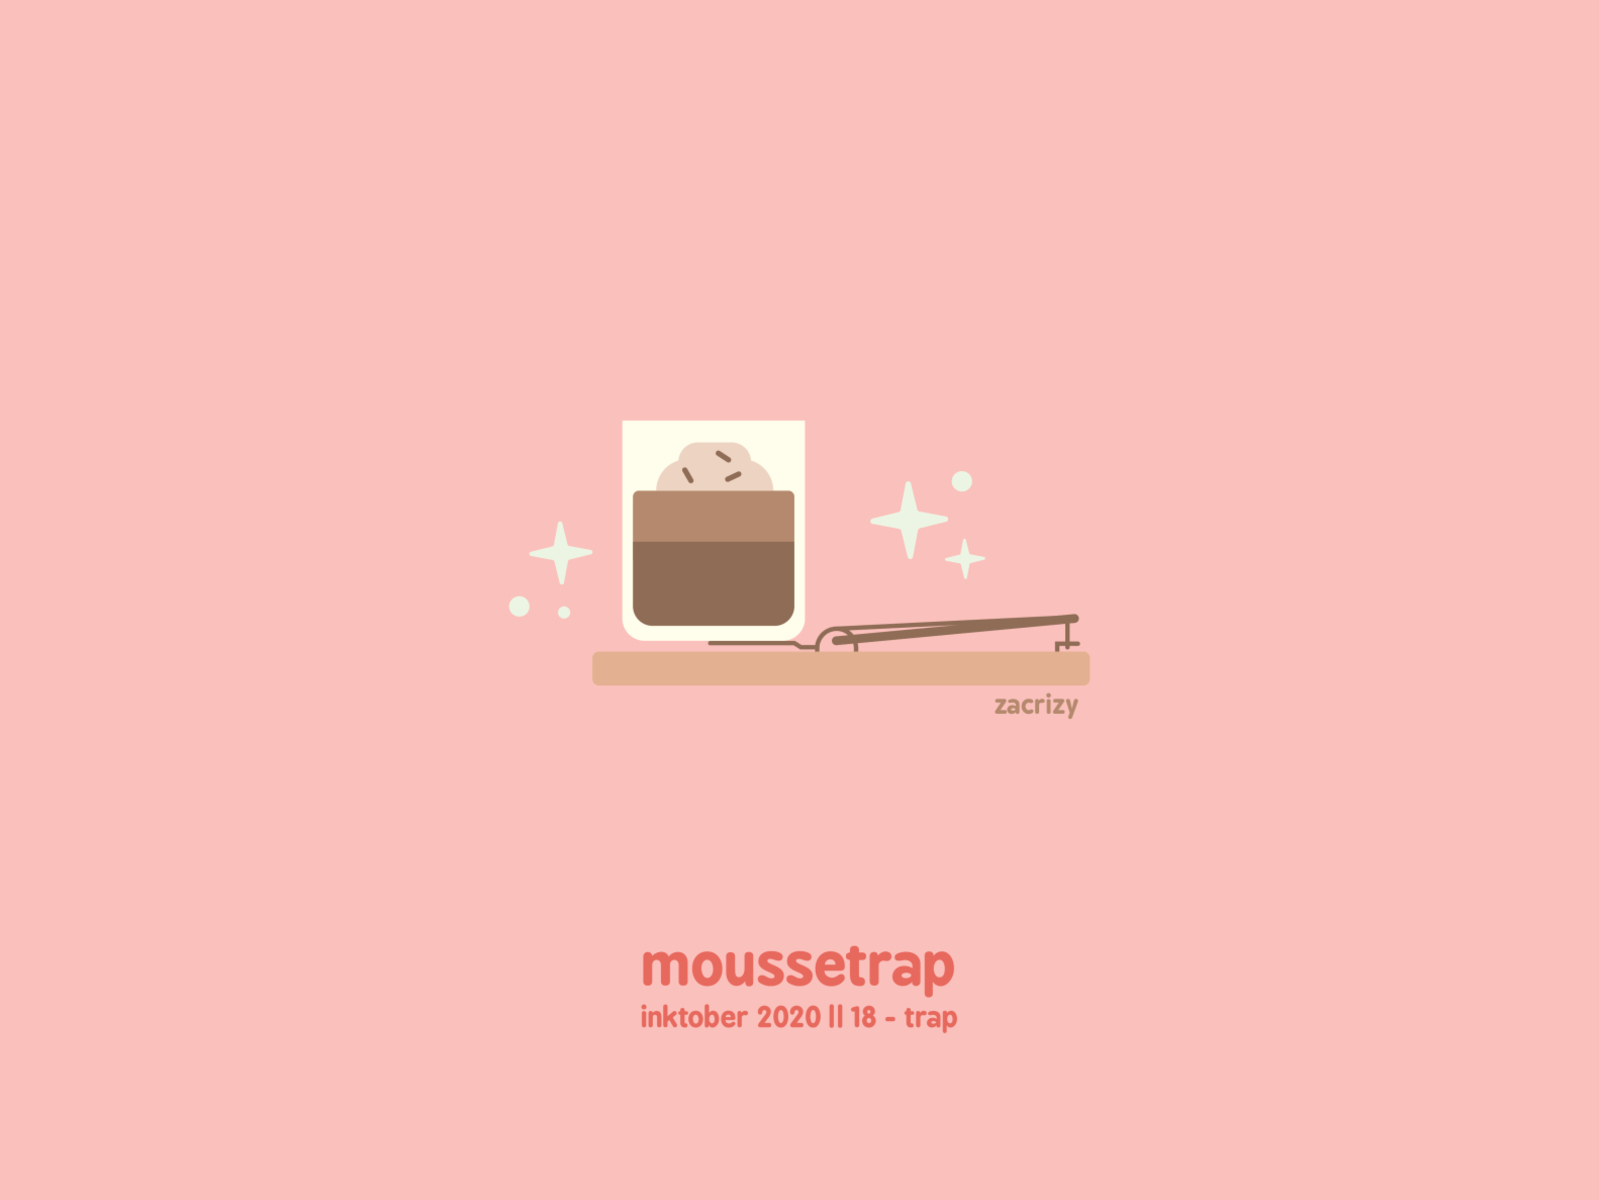 Inktober 2020 - Day 18 - Trap cake chocolate chocolate mousse cup cute design dessert food happy illustration inktober minimal mouse trap mousetrap mousse play on words pun trap treat vector